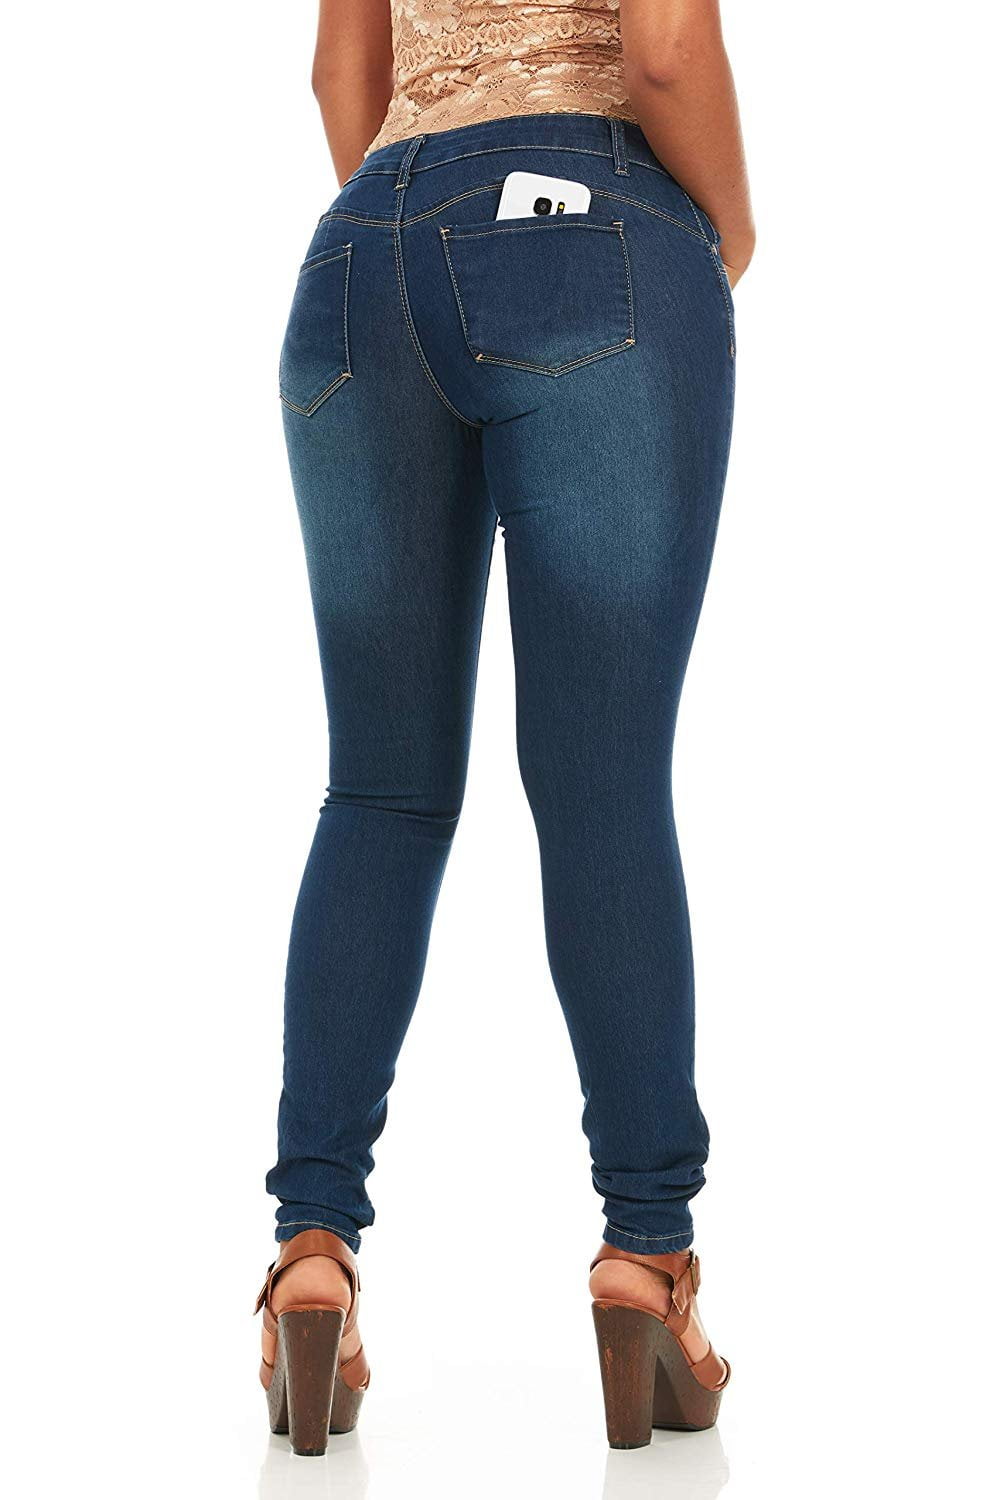 Cute Women's Juniors/Plus Butt Lifting Stretchy Skinny Jeans